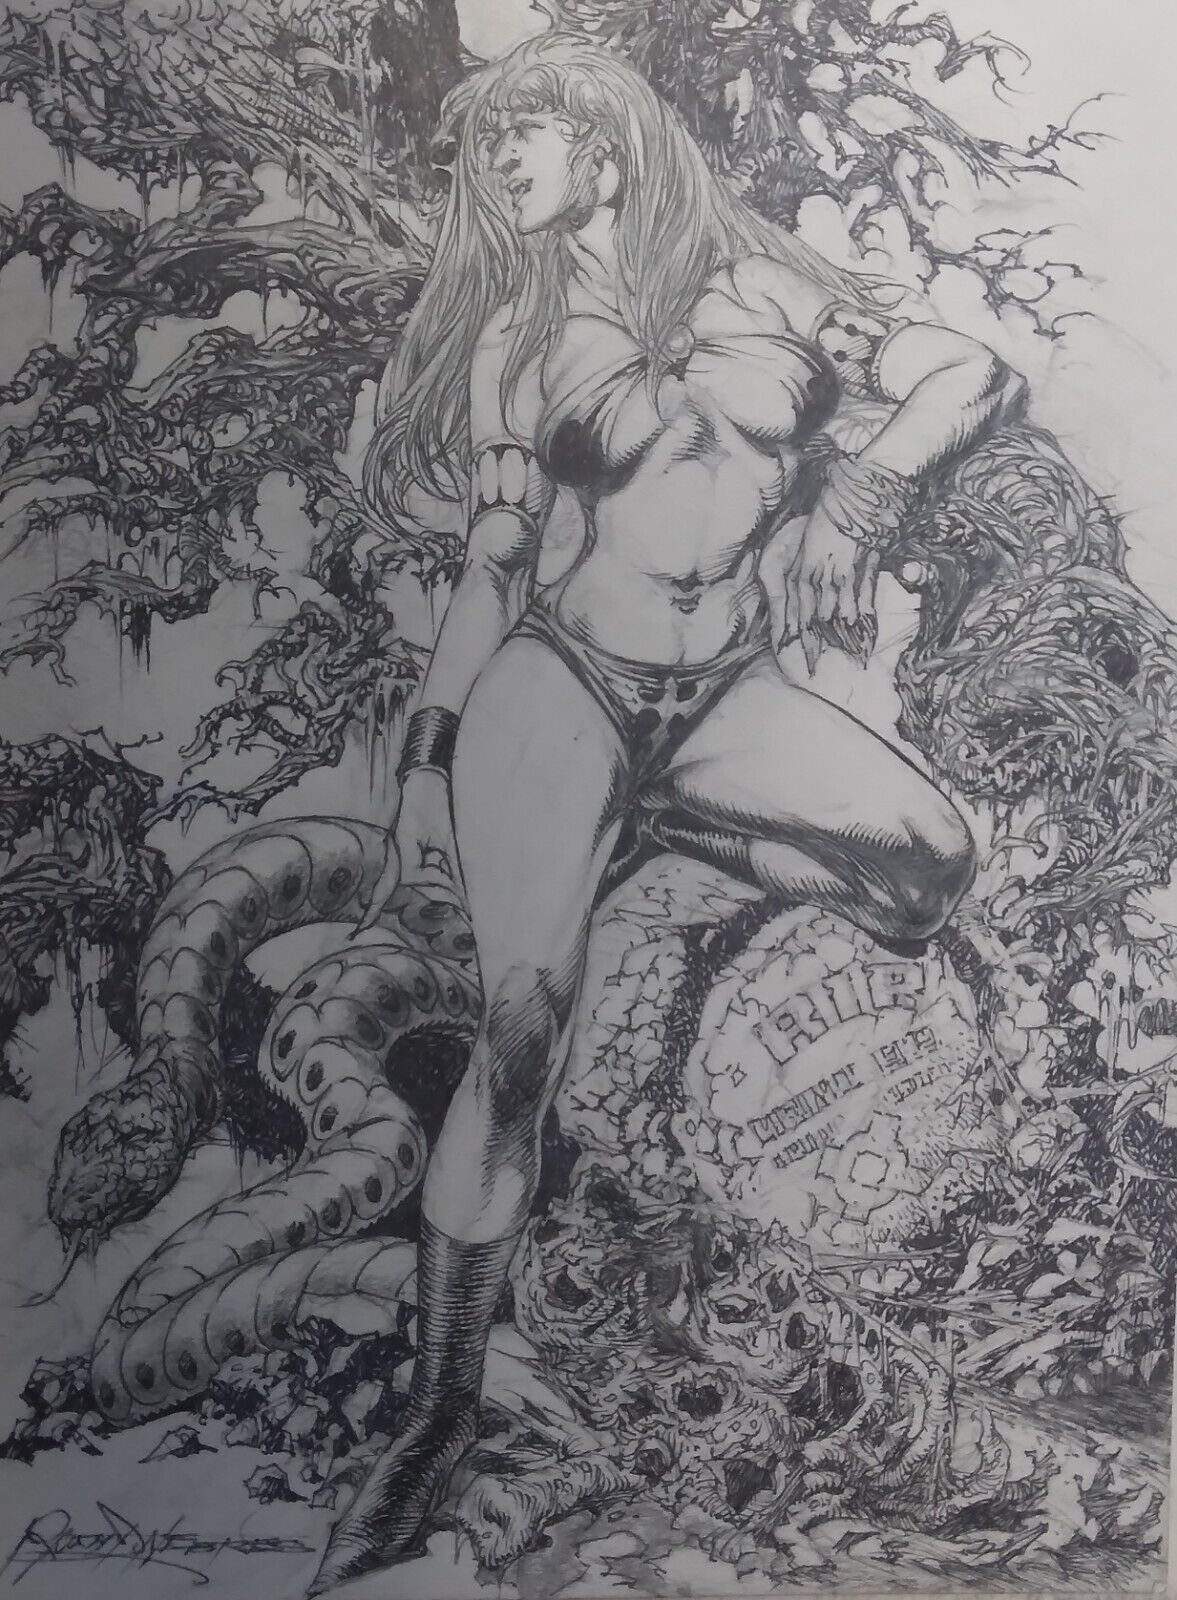 VAMPIRELLA in Cemetery 9x12 by Rudy Nebres full figure pencil/inked 1998